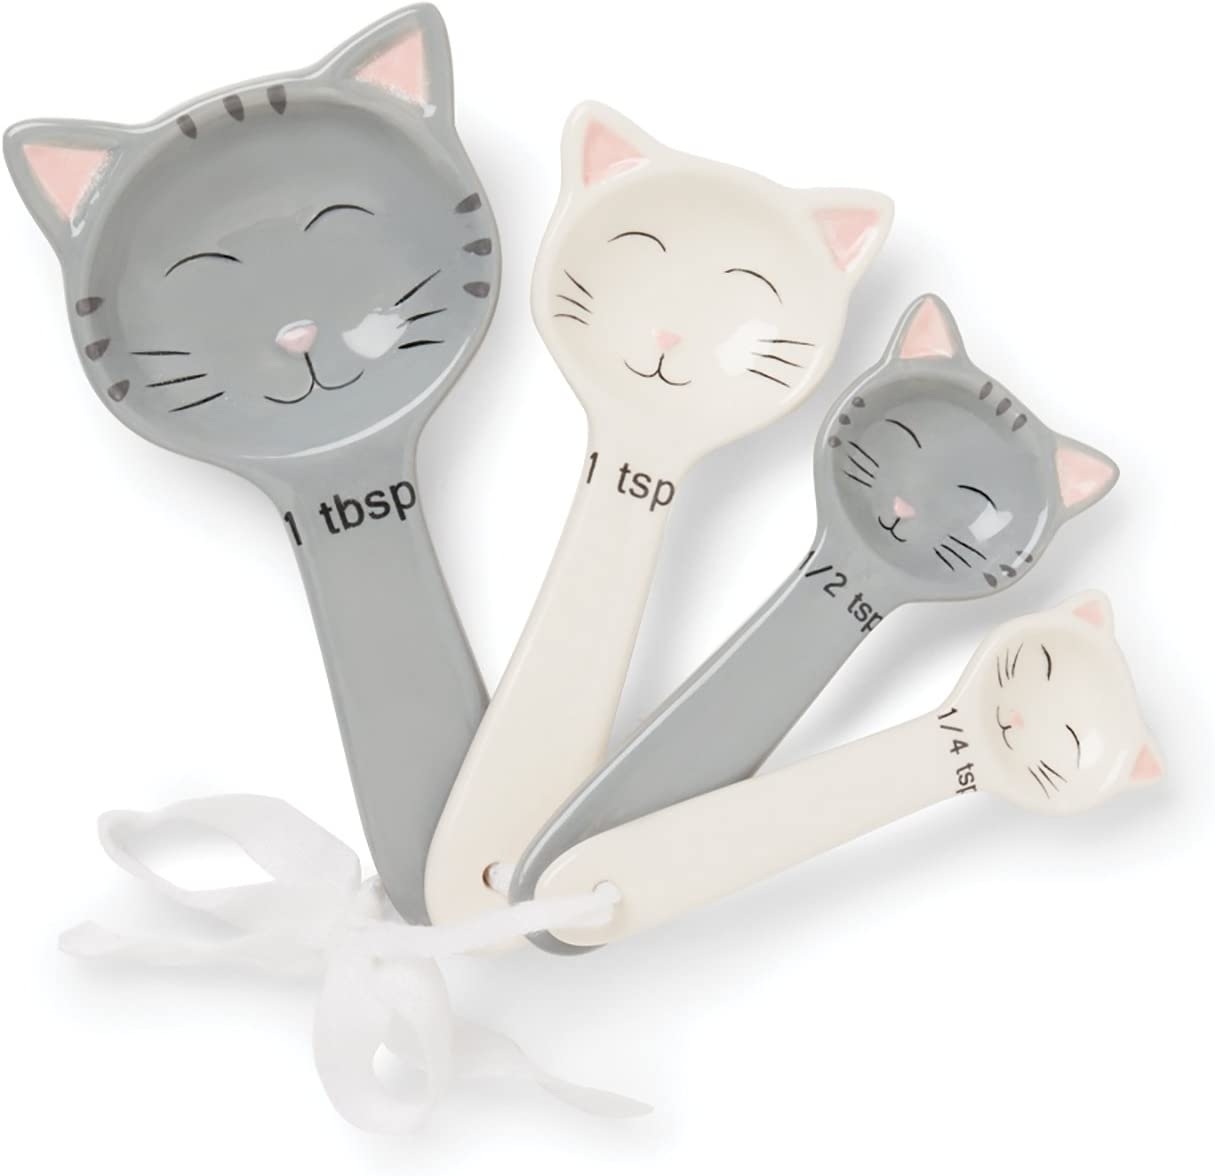 Fox Run Cute Cat Little Kittens Ceramic Measuring Spoon Set, 6 x 3 x 2.25 inches, Multicolored,11717 Import To Shop ×Product